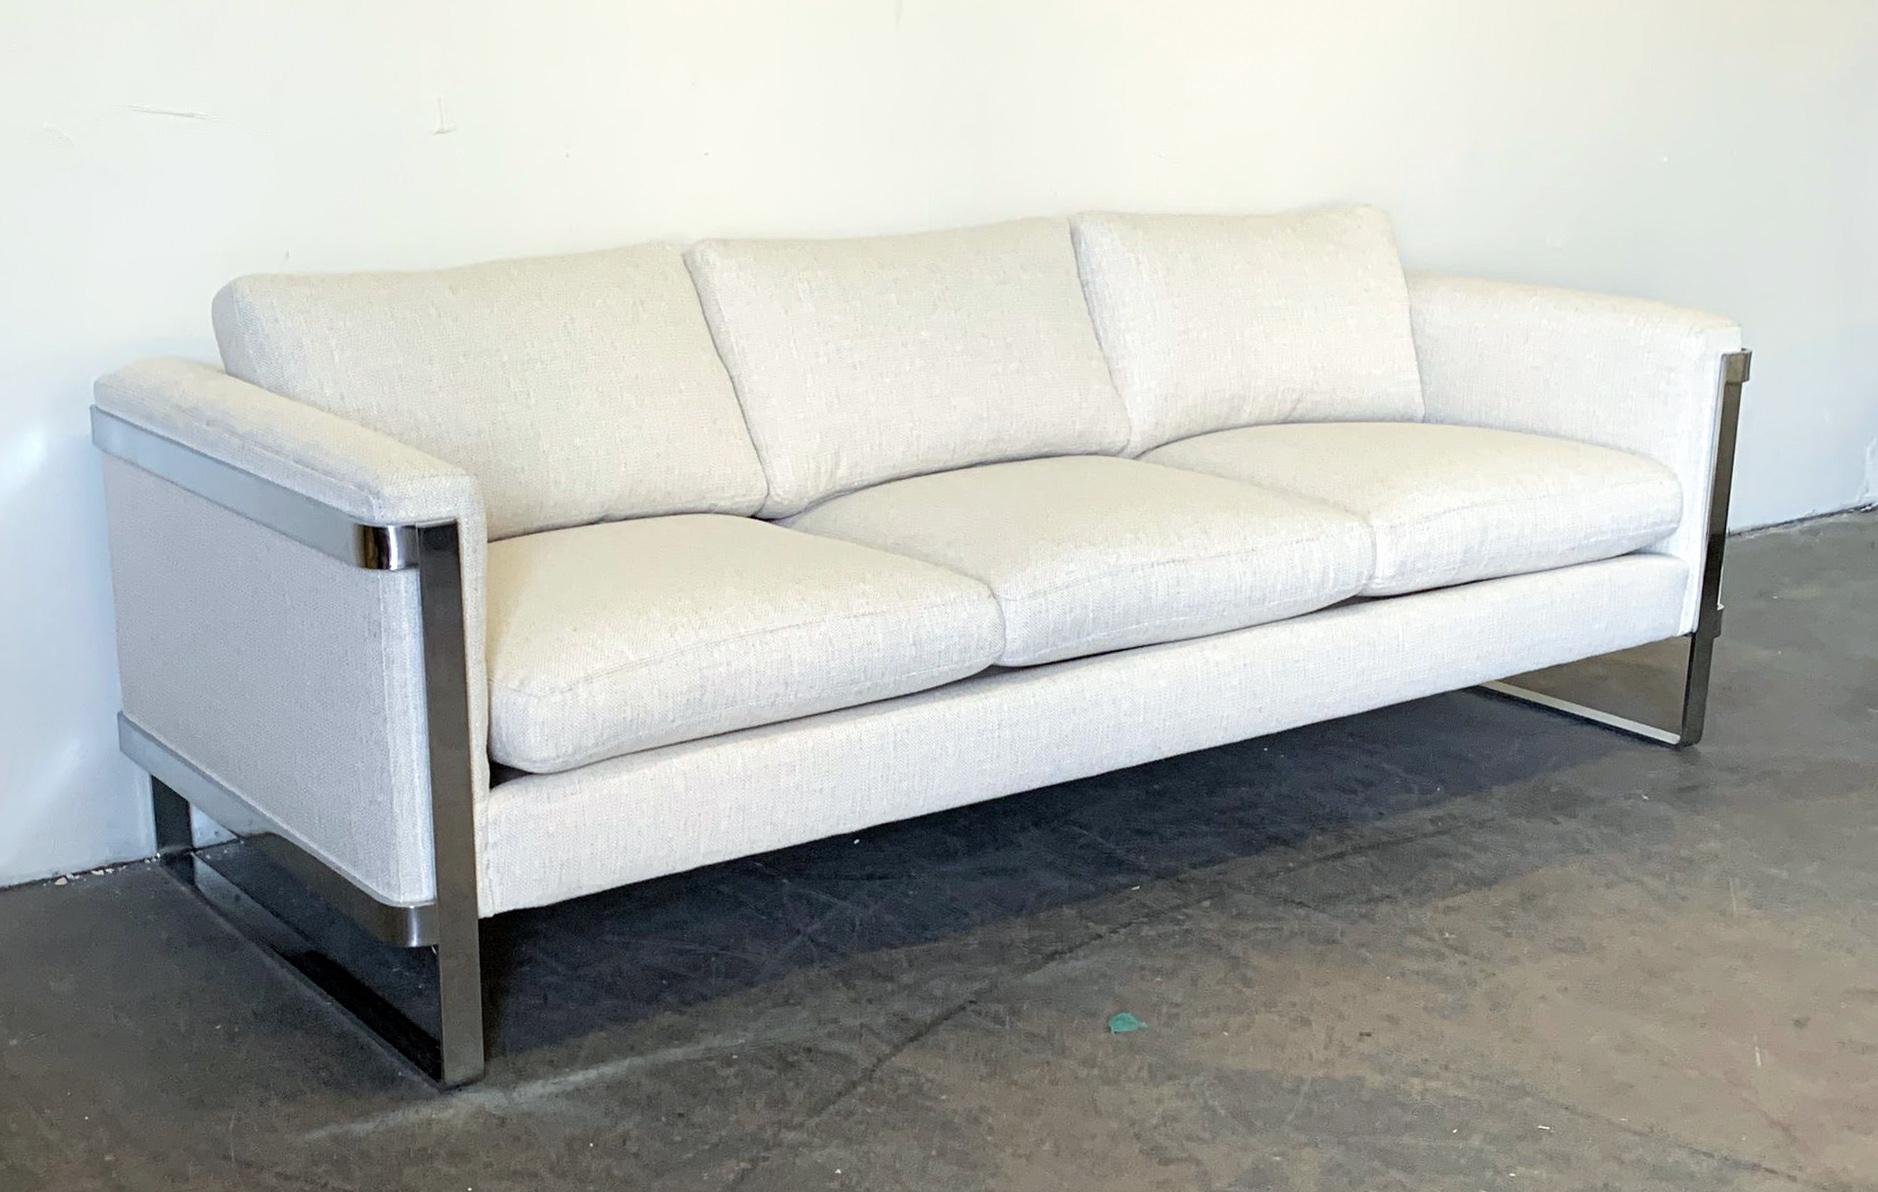 Often attributed to Milo Baughman, this stunning sofa features chrome flat bar sides that wrap the sides of the sofa. This stunning sofa is both masculine and chic all at the same time. This sofa features clean lines, and an off-white light oatmeal